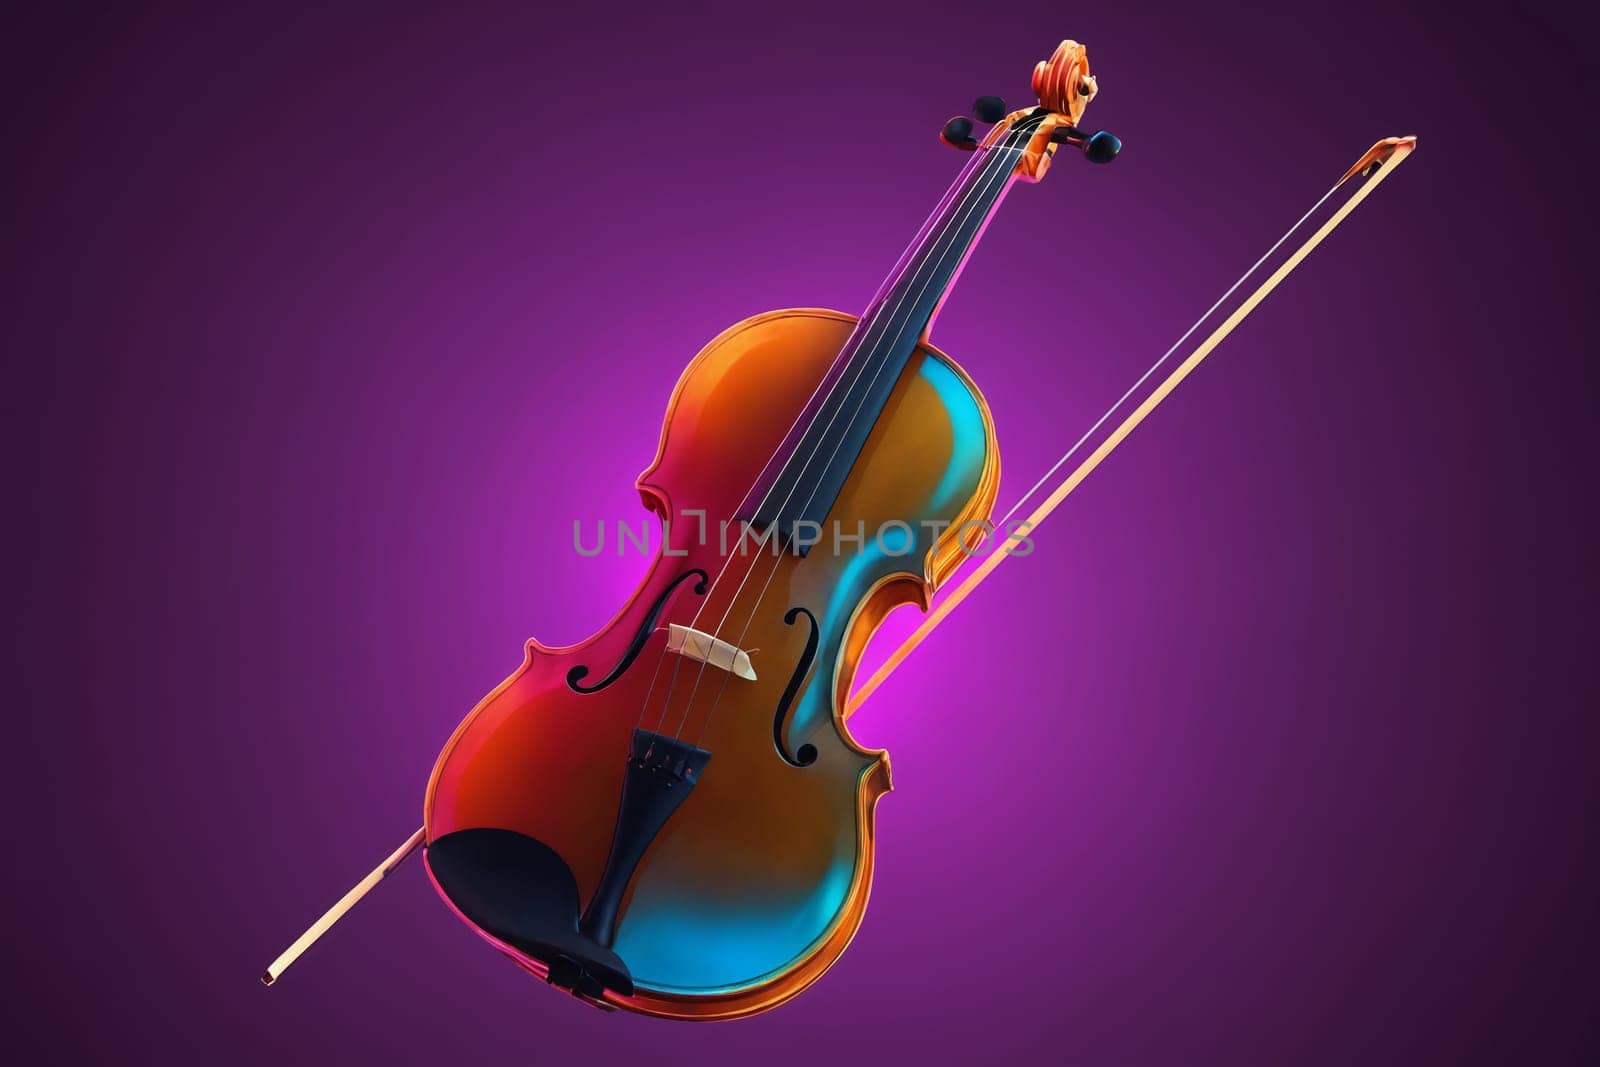 Striking close-up of a violin under a wash of neon purple light, creating a visually electric effect.